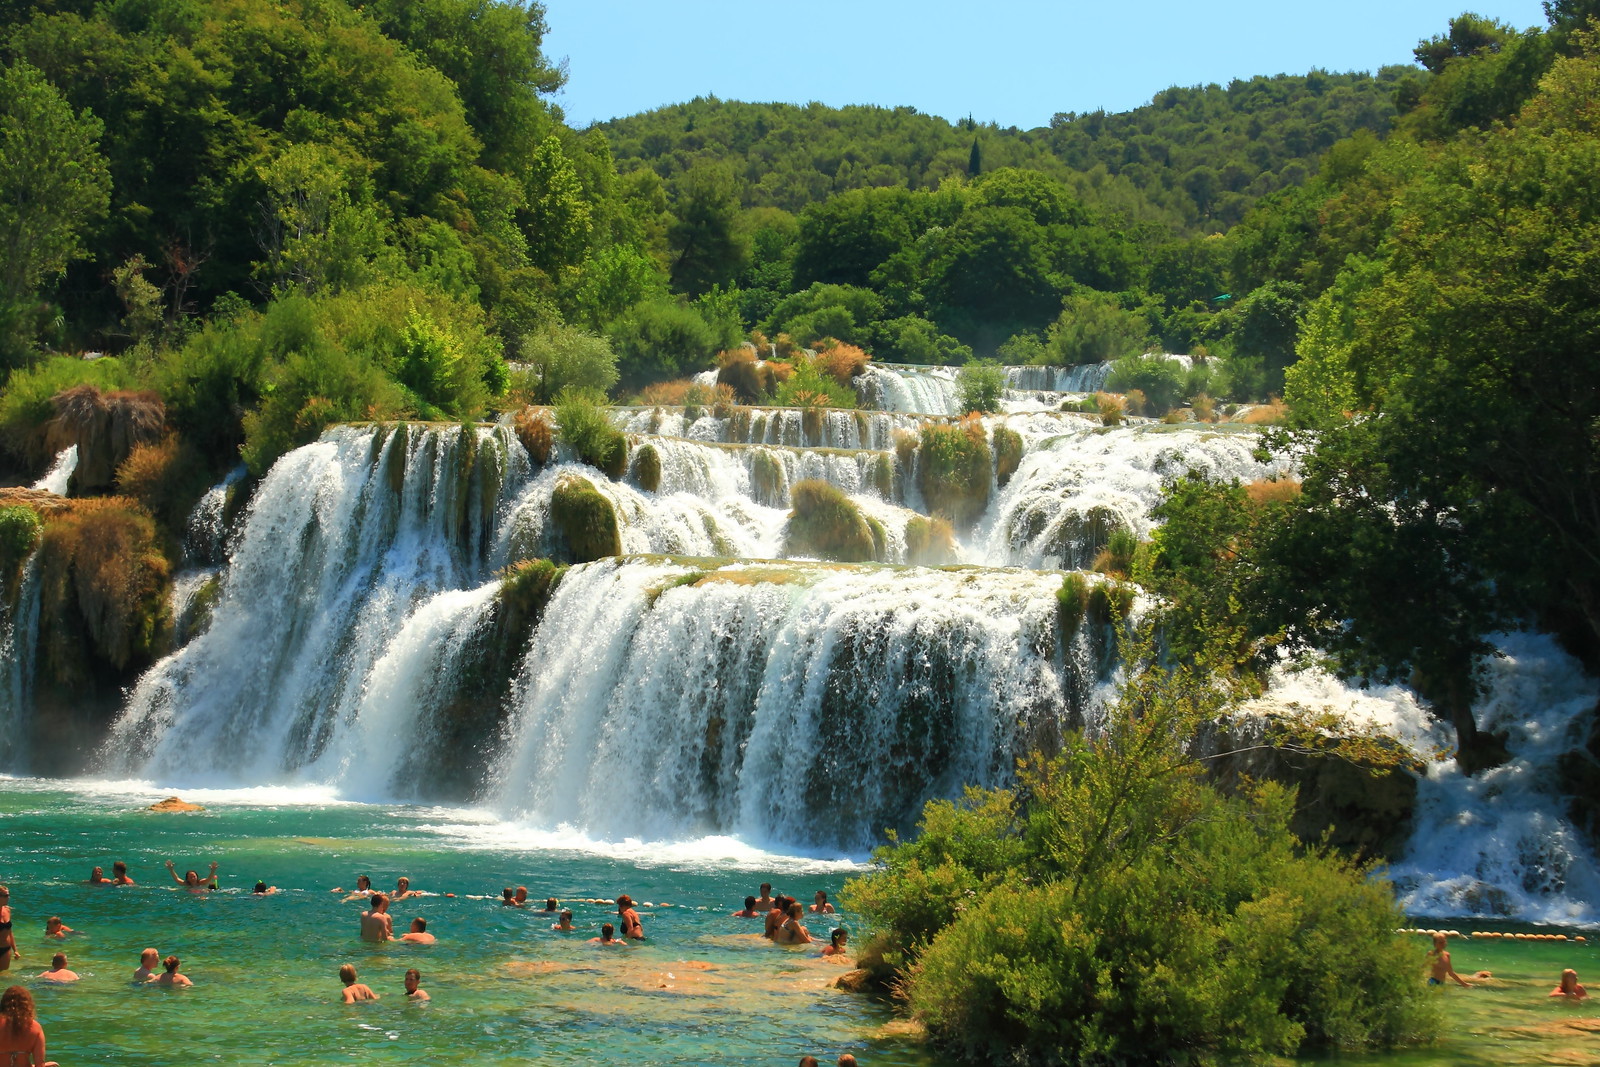 Is Your Last Chance To Swim By The Waterfalls Of Krka National Park